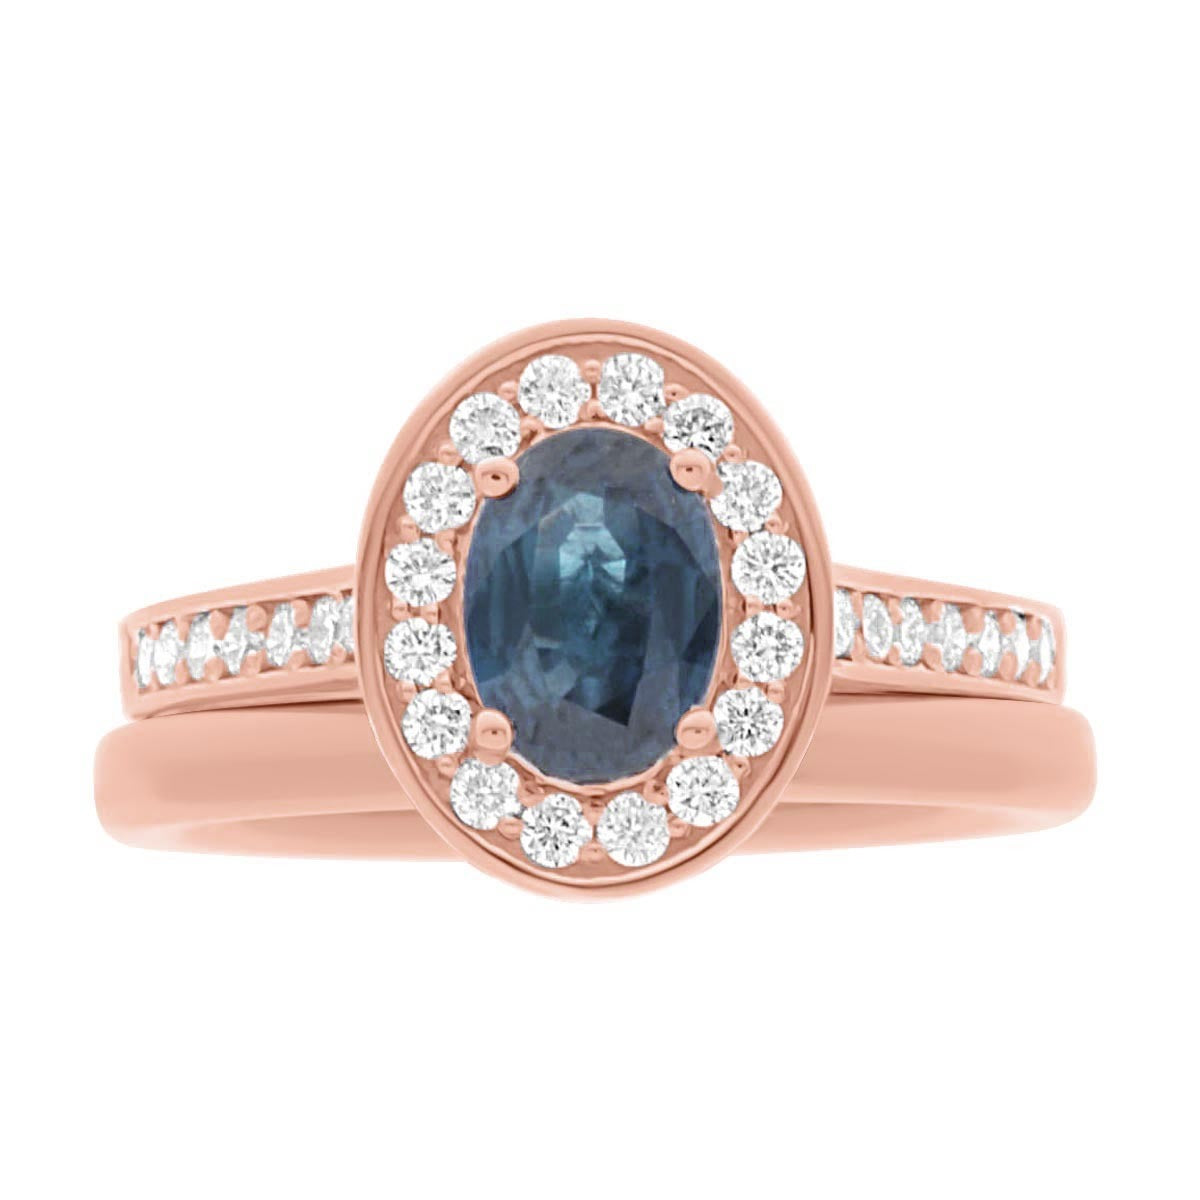 Sapphire Halo Engagement Ring in rose gold with a matching wedding ring